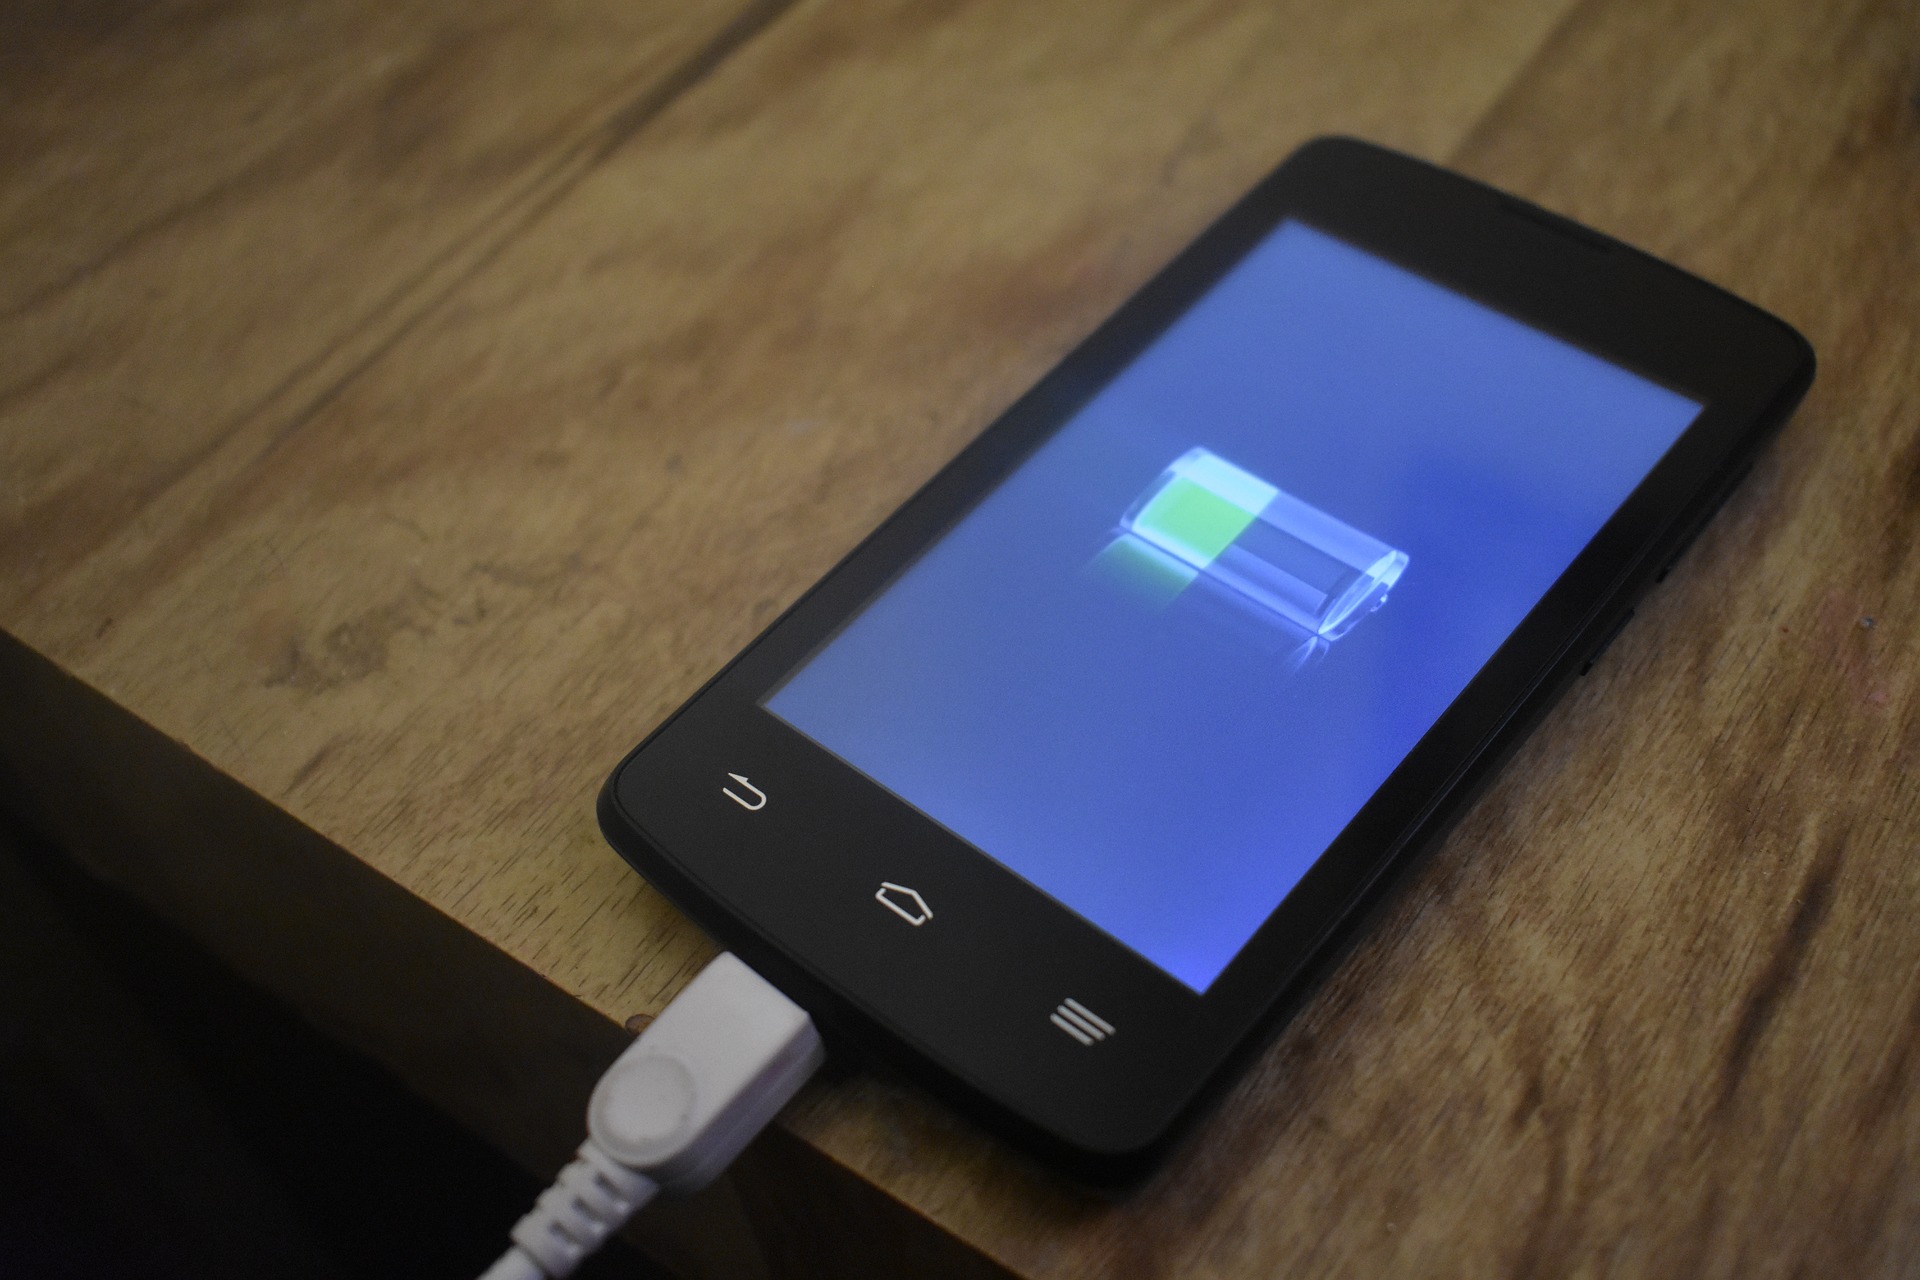 how to charge your phone faster - Avoid checking the battery level